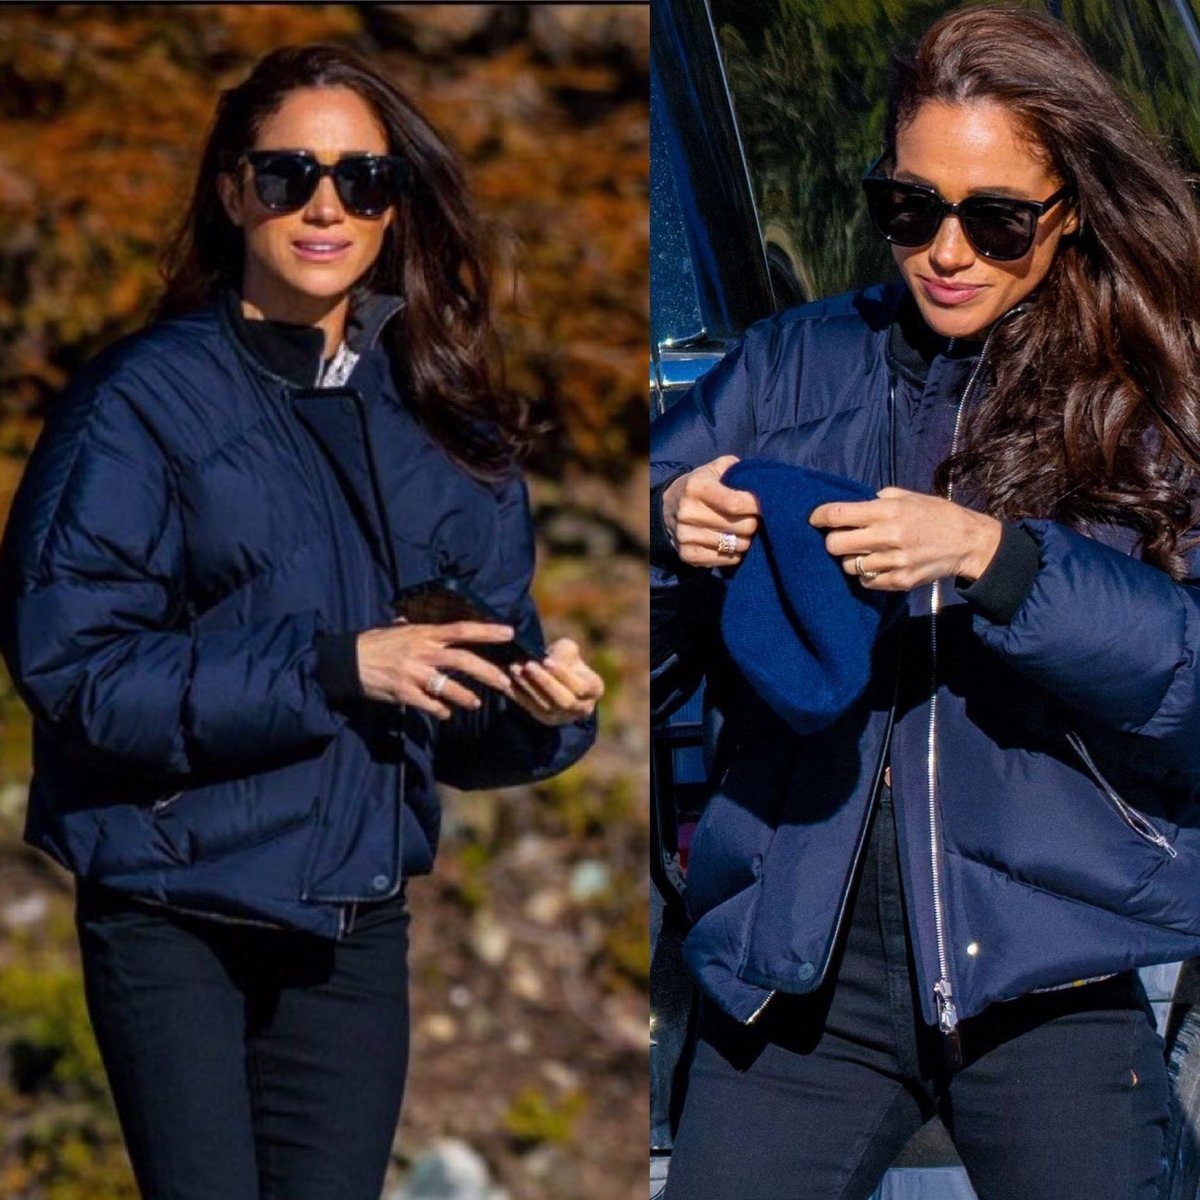 Princess Meghan, The Duchess of Sussex Stepped out in style, making a fashion statement in Canada 😍#MeghanMarkle

wp.me/pbp9bL-BC